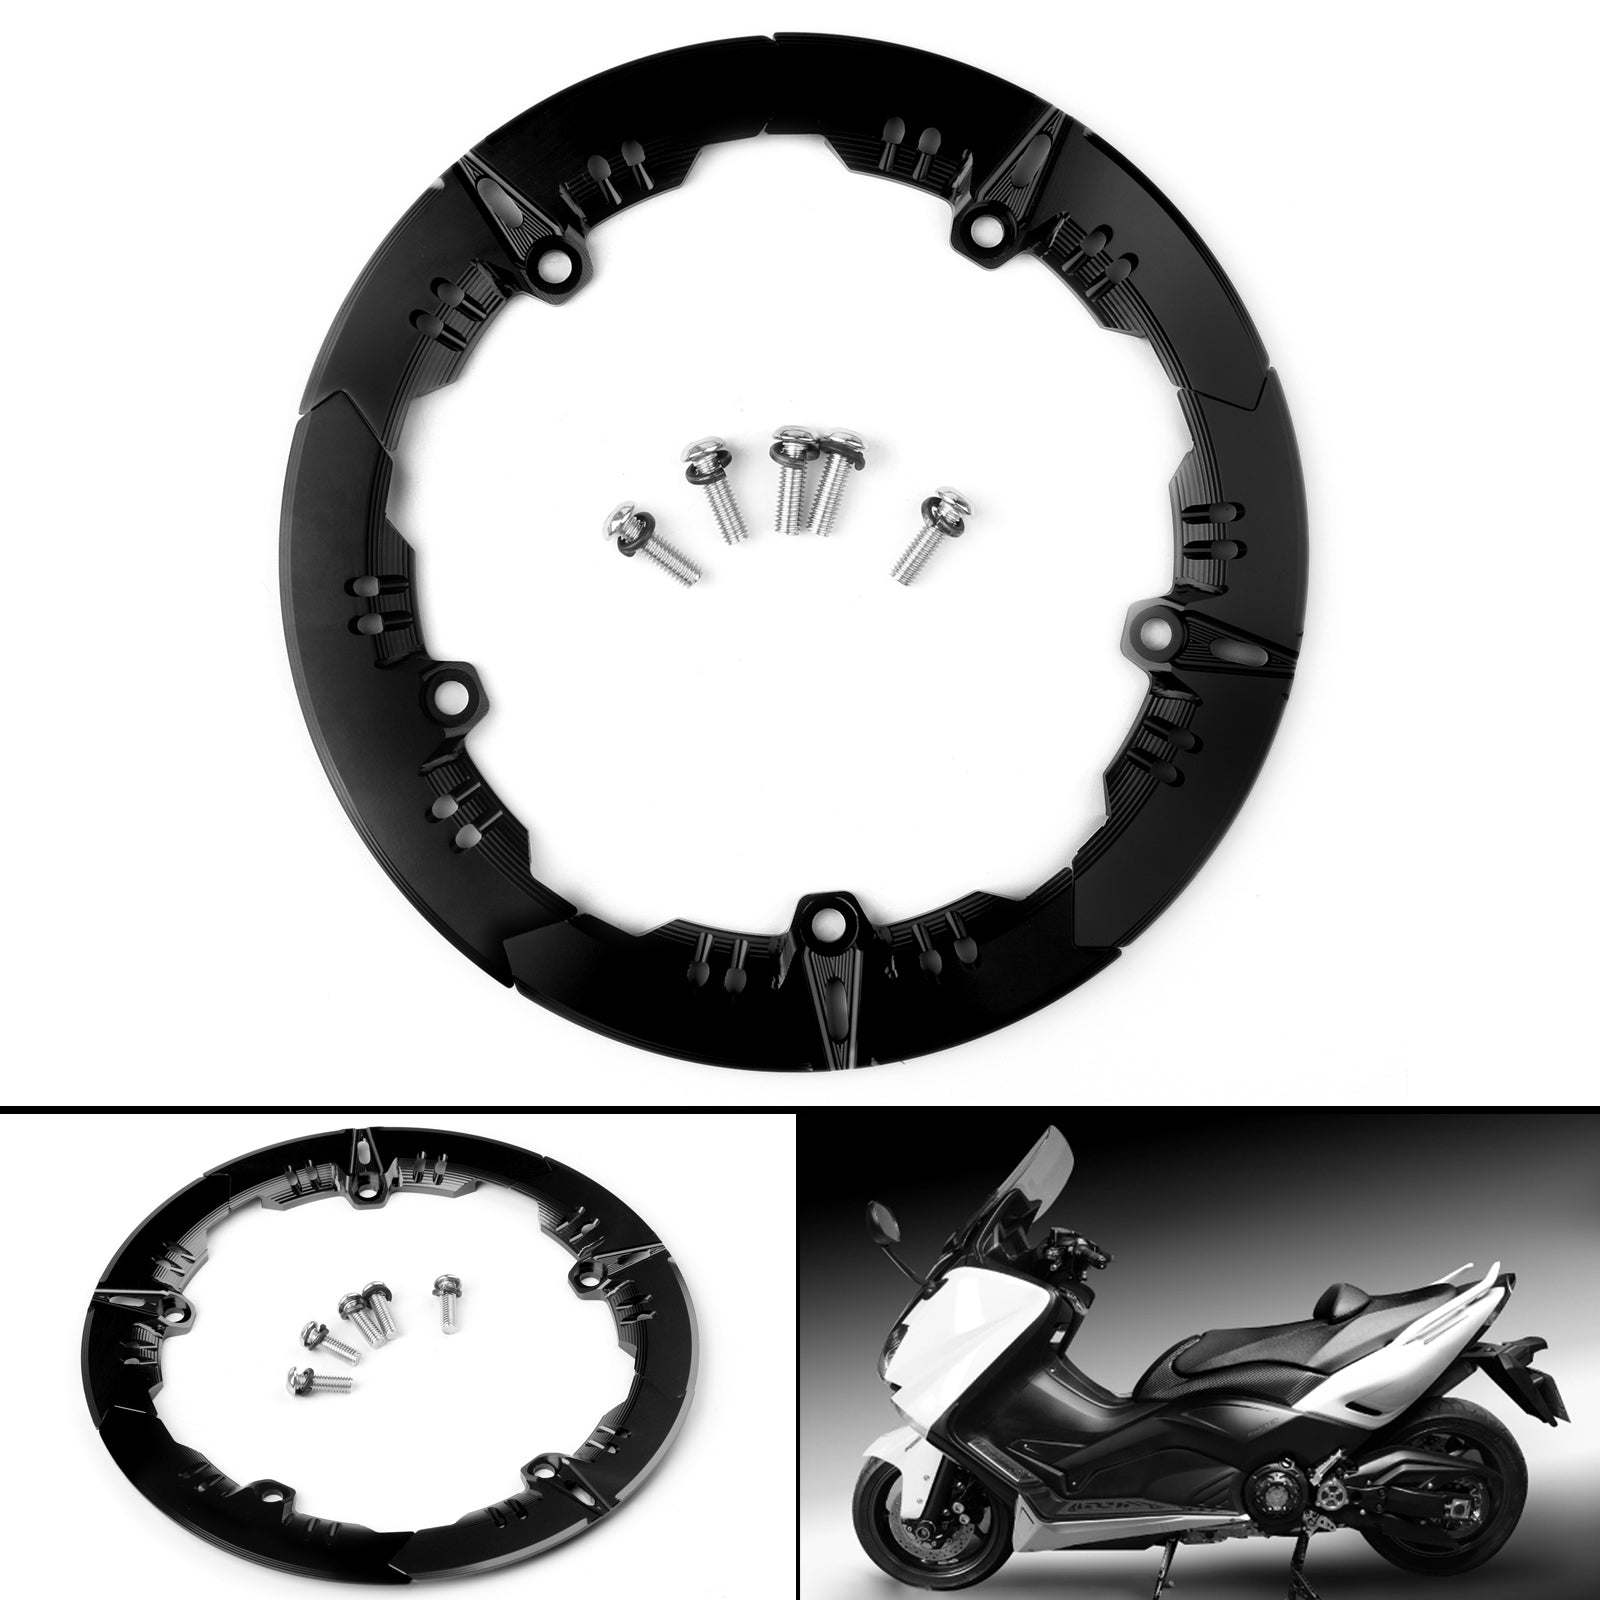 CNC Aluminum Transmission Belt Pulley Cover For yamaha TMAX 530 SX DX (2017) 5 Color